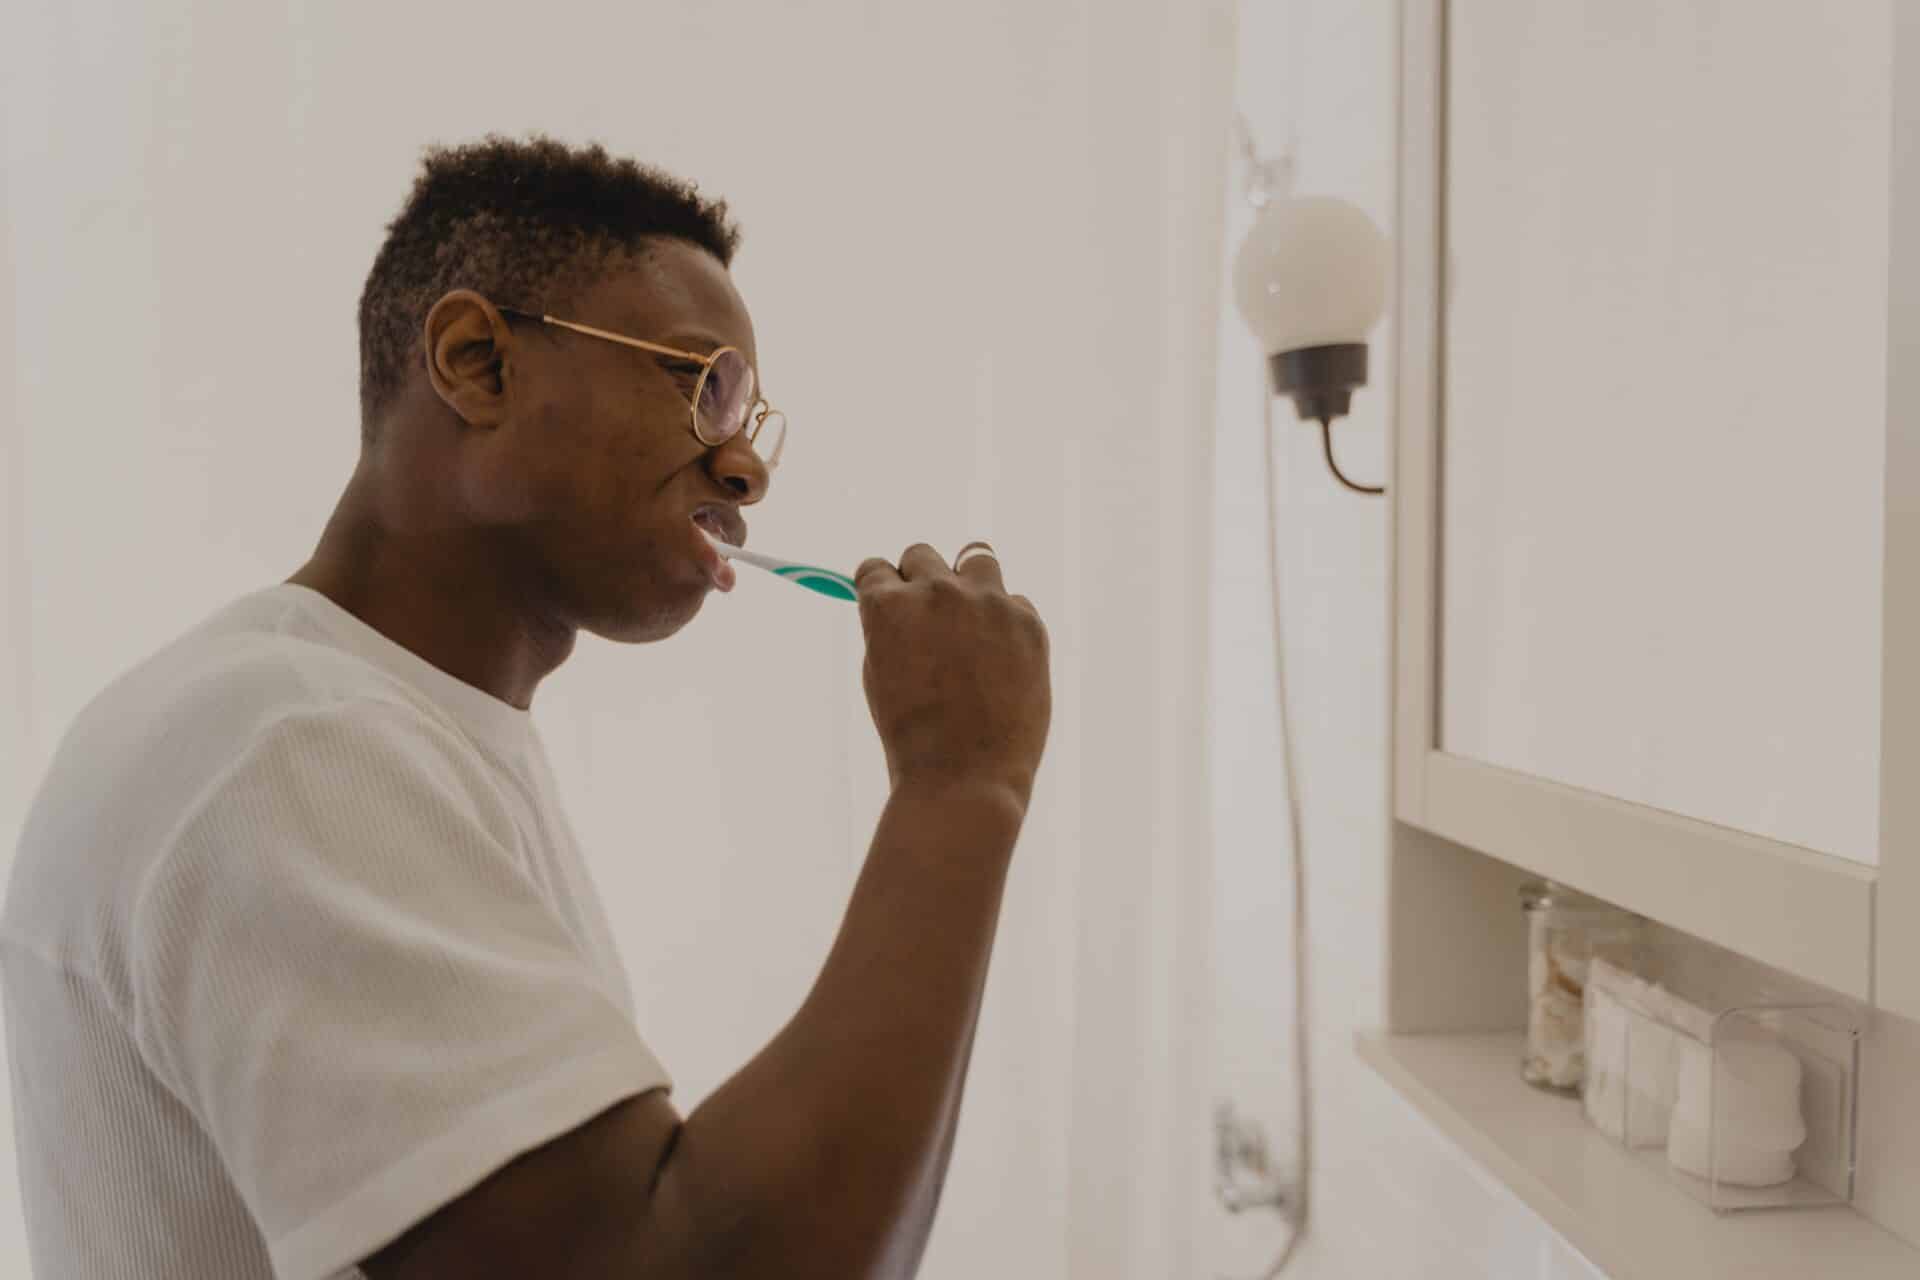 Image of a man brushing his teeth while looking in the mirror